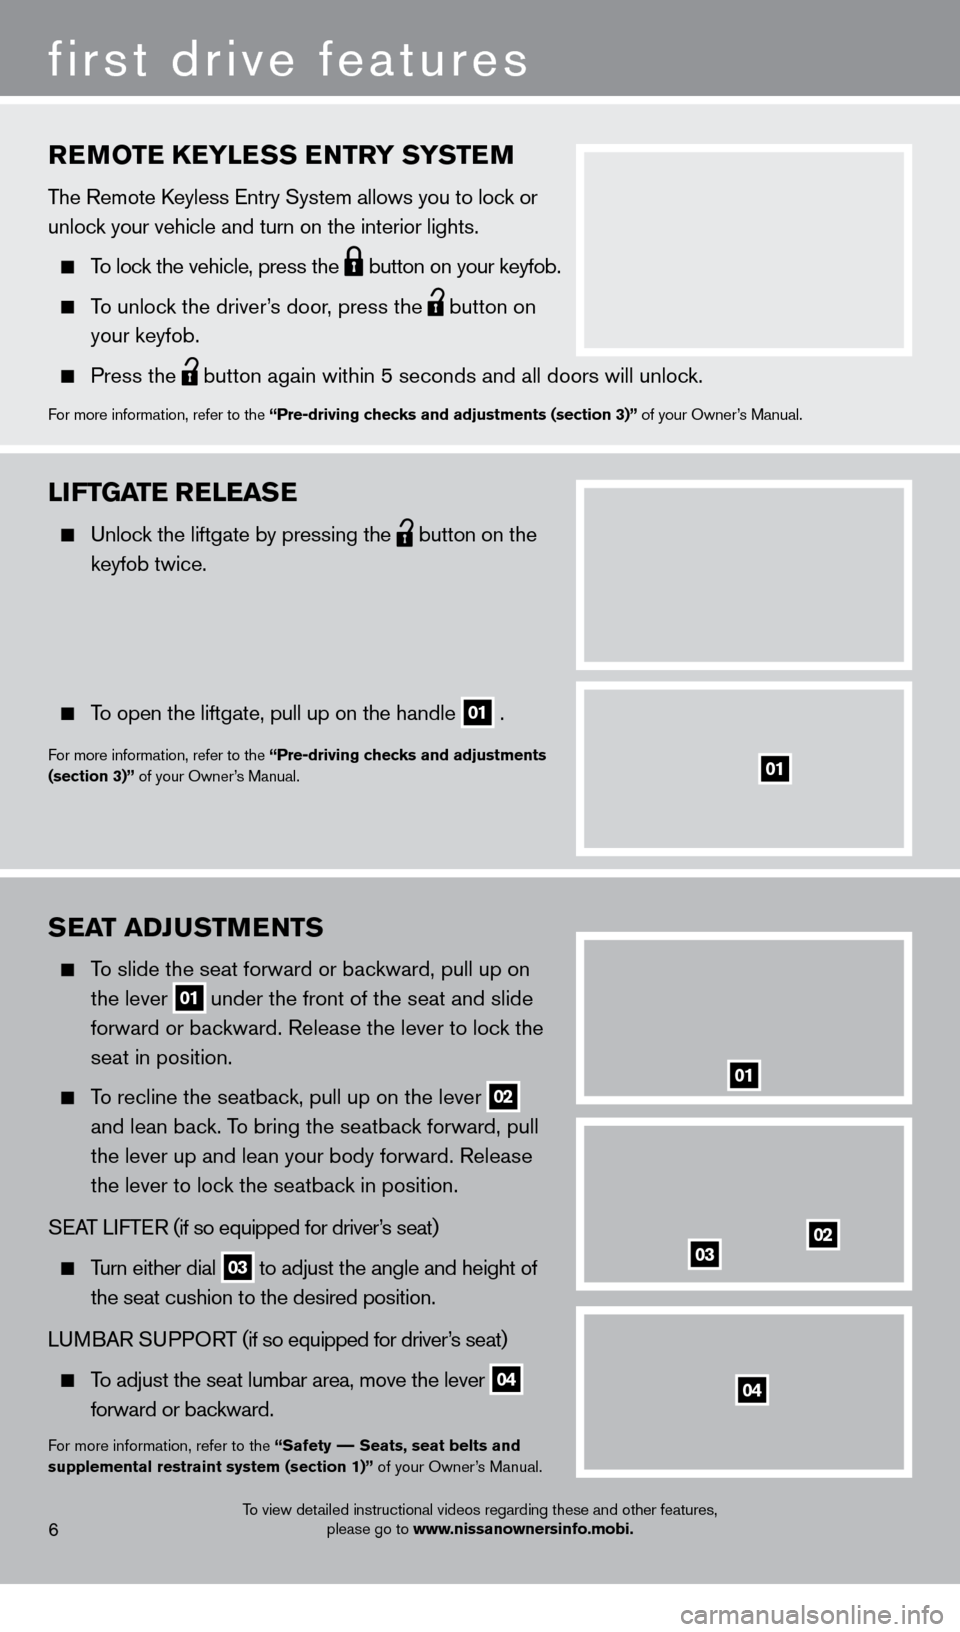 NISSAN XTERRA 2013 N50 / 2.G Quick Reference Guide SEAT ADJUSTMENTS
  To slide the seat forward or backward, pull up on 
 

 
the lever  01 under the front of the seat and slide  
 forward or bac kward. Release the lever to lock the 
 

 
seat in posi